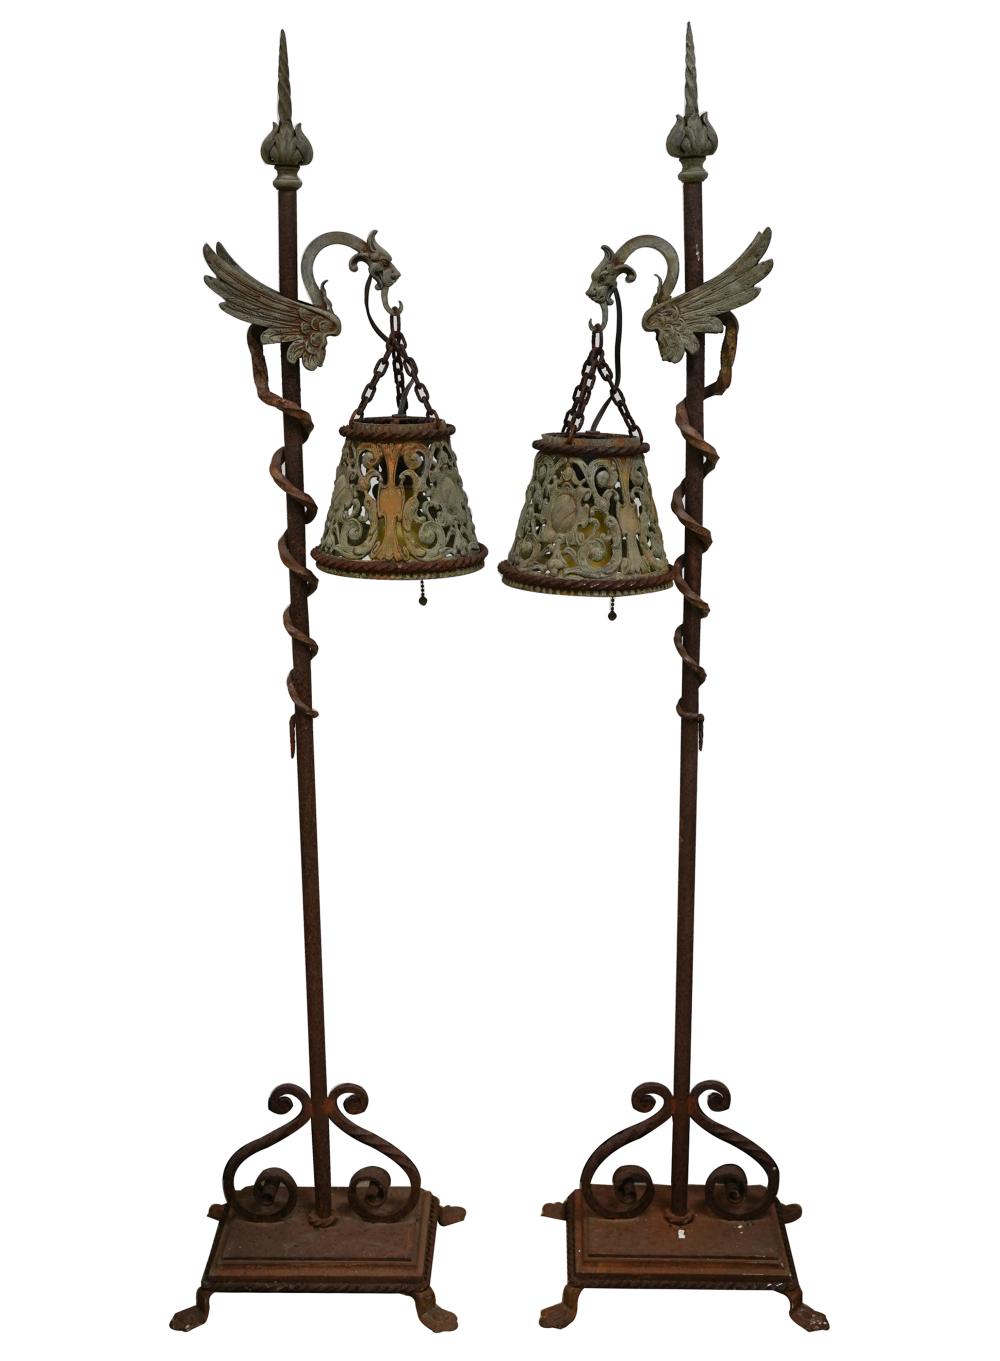 PAIR OF SPANISH REVIVAL STYLE WROUGHT 331866